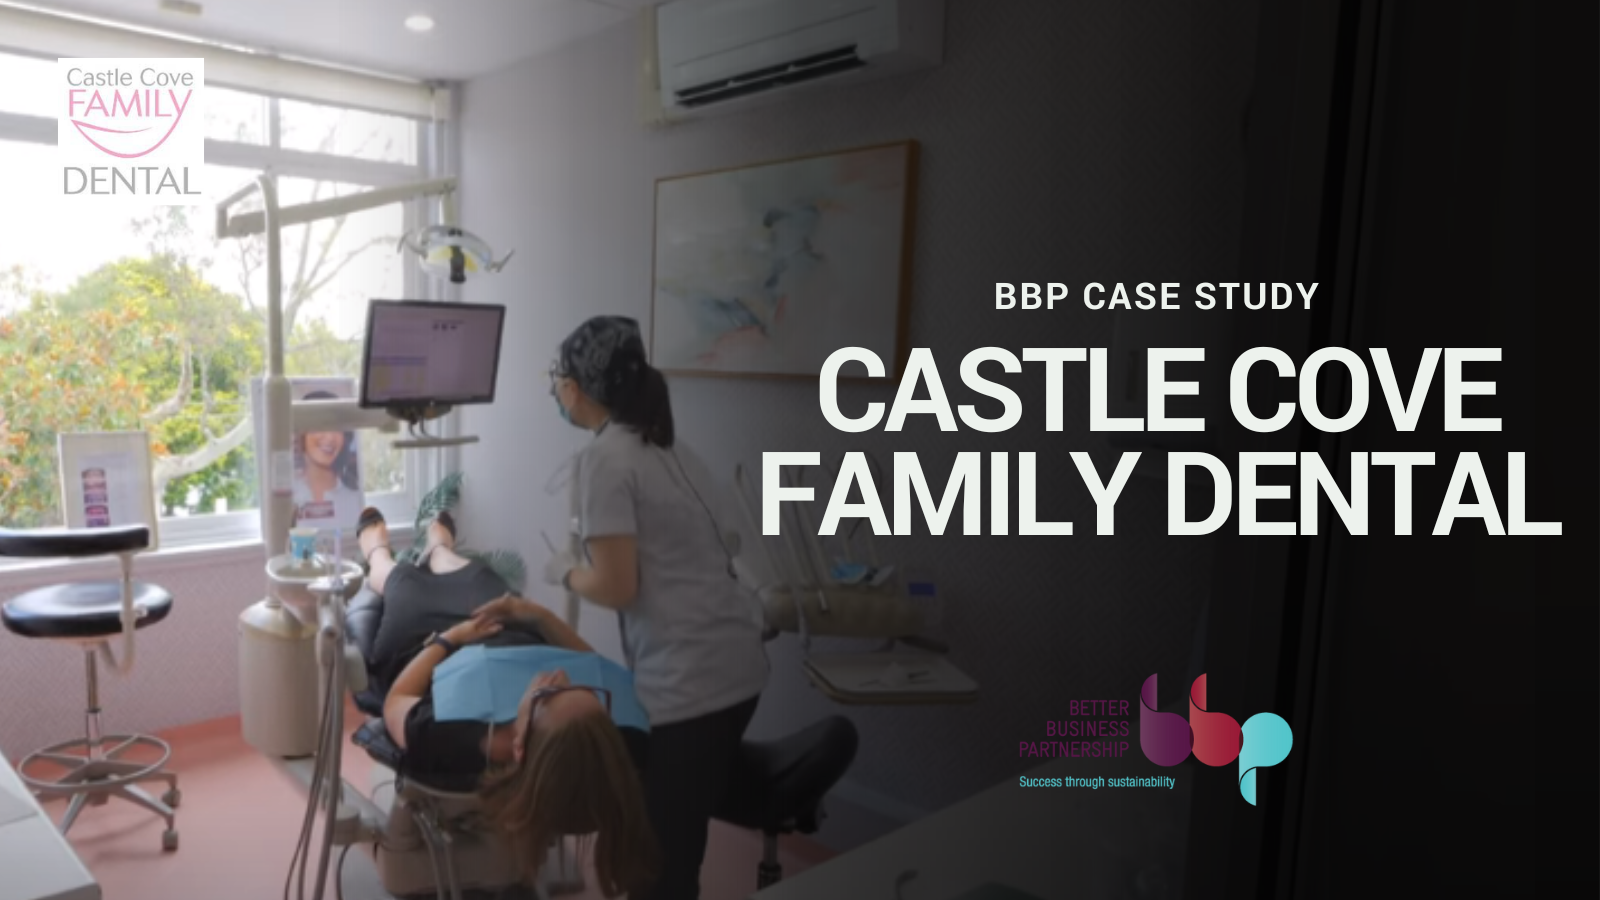 Dentist and client at Castle cove family dental